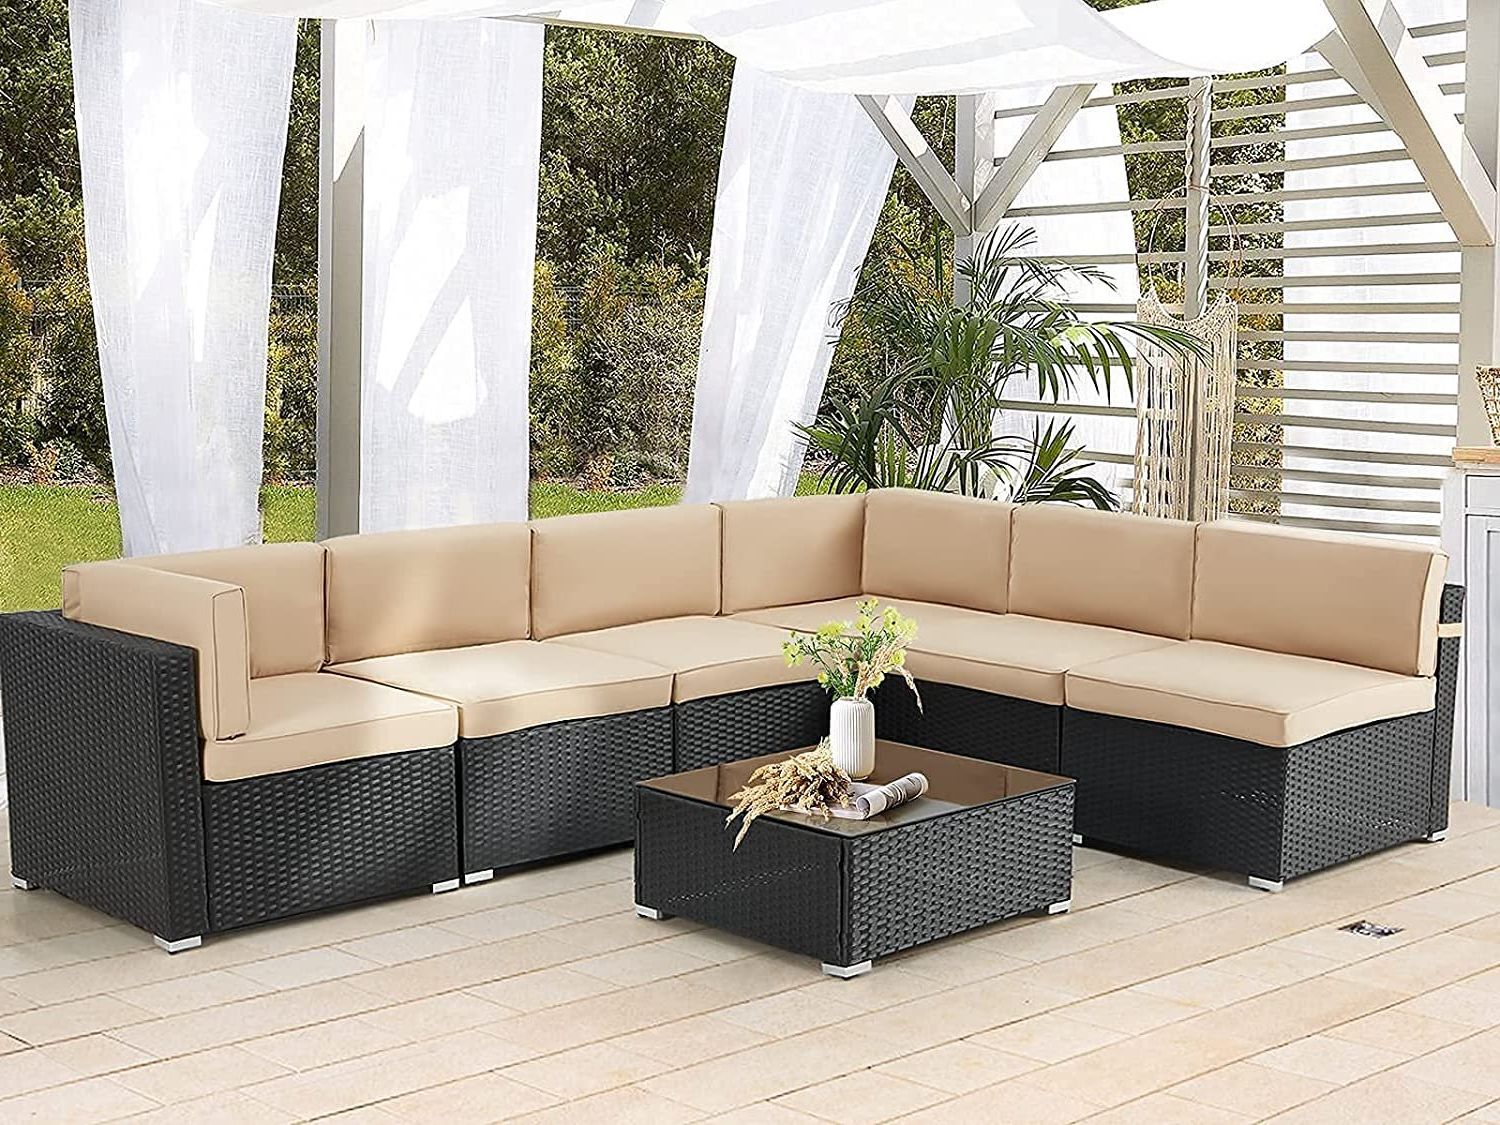 Best And Newest Ebern Designs Emilienne 7 Piece Rattan Sectional Seating Group With  Cushions & Reviews (View 13 of 15)